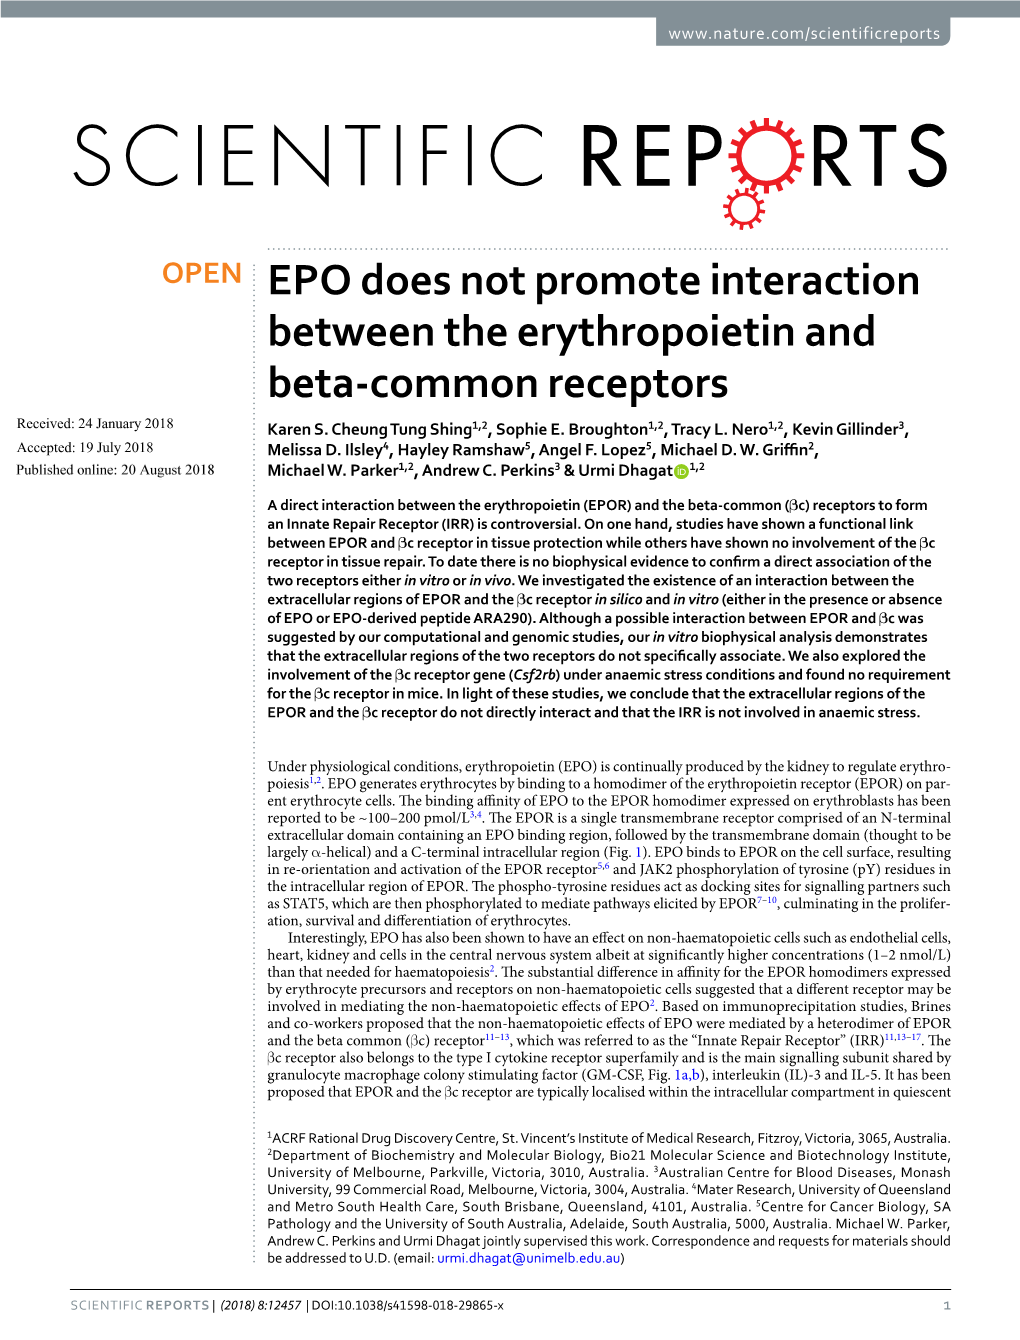 EPO Does Not Promote Interaction Between the Erythropoietin and Beta-Common Receptors Received: 24 January 2018 Karen S